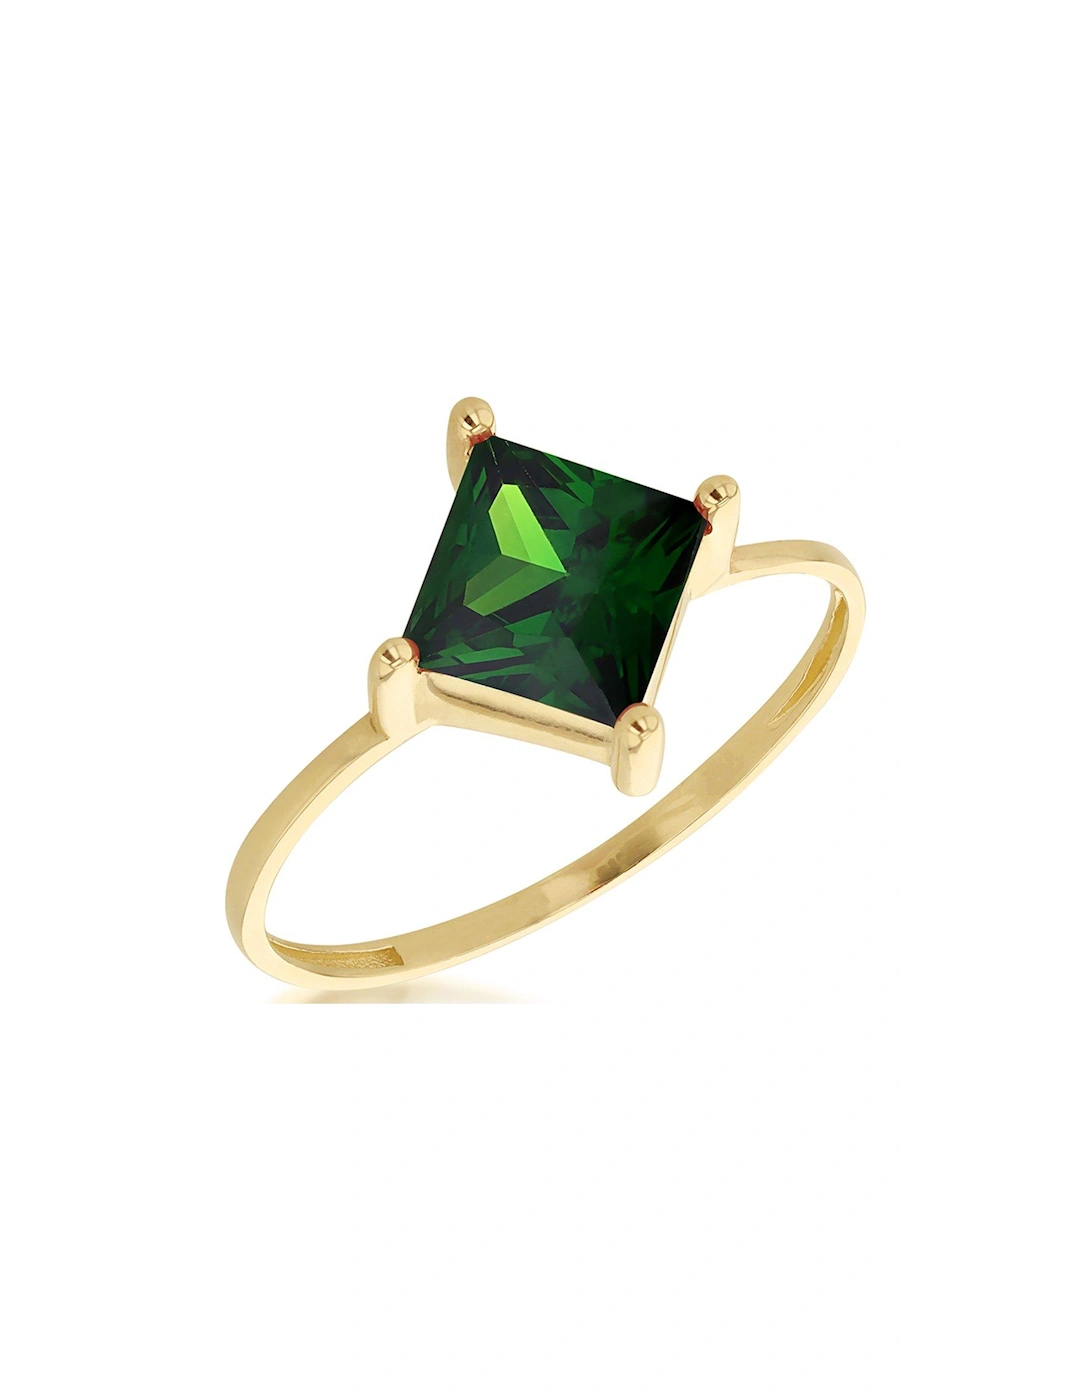 9ct Yellow Gold Green 6mm x 6mm Princess Cut CZ Solitaire Ring, 2 of 1